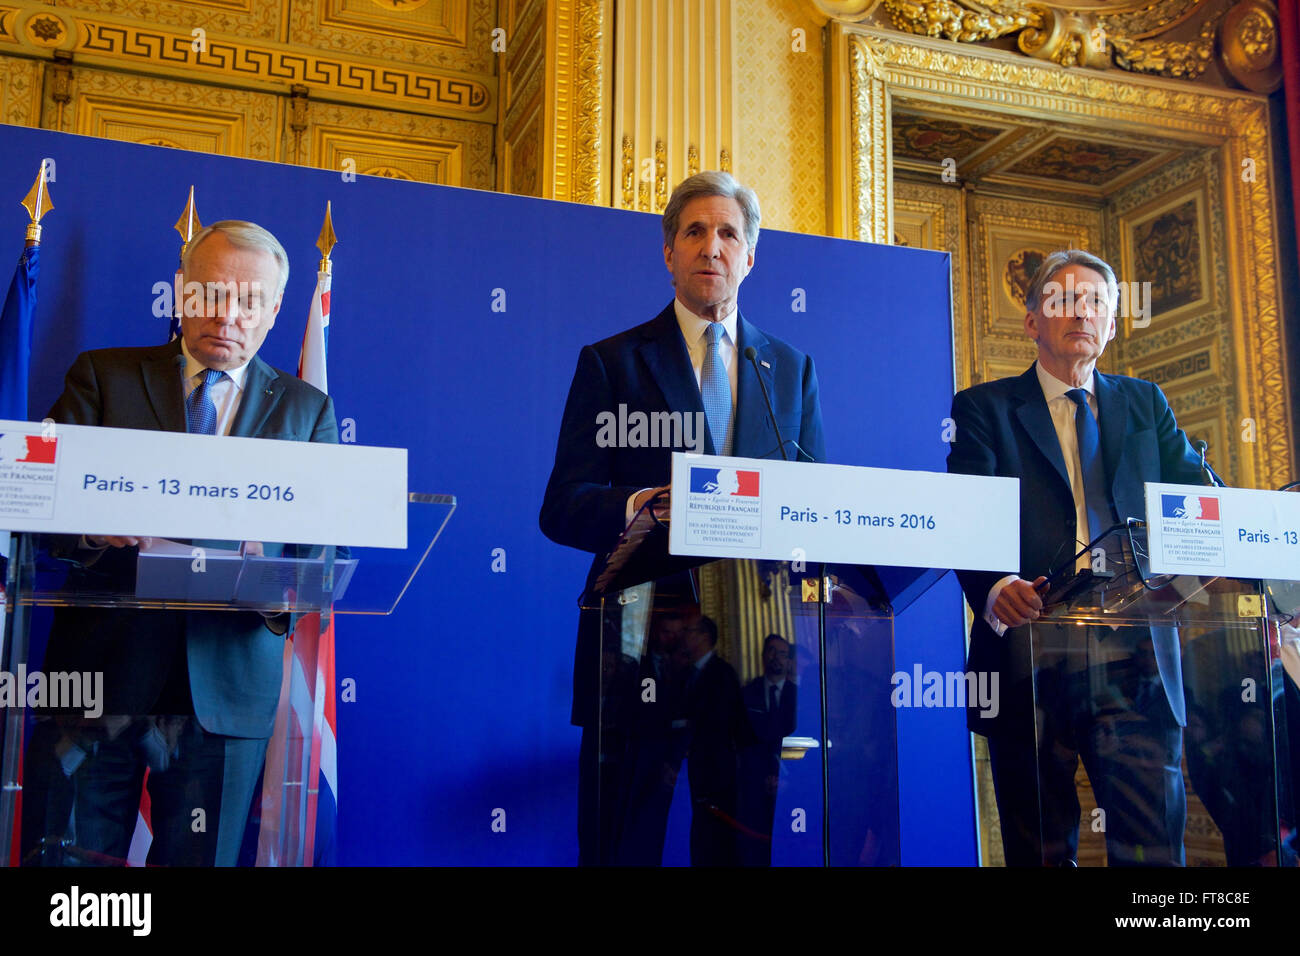 U.S. Secretary of State John Kerry stands between French Foreign Minister Jean-Marc Ayrault and British Foreign Secretary Philip Hammond on March 13, 2015, at the Quai d'Orsay in Paris, France, addresses reporters after he and his counterparts held an E4+1 meeting - including representatives of France, Germany, Italy, the United Kingdom, and European Union - focused on Syria, Libya, Yemen, Ukraine, and other foreign policy matters. [State Department Photo/Public Domain] Stock Photo